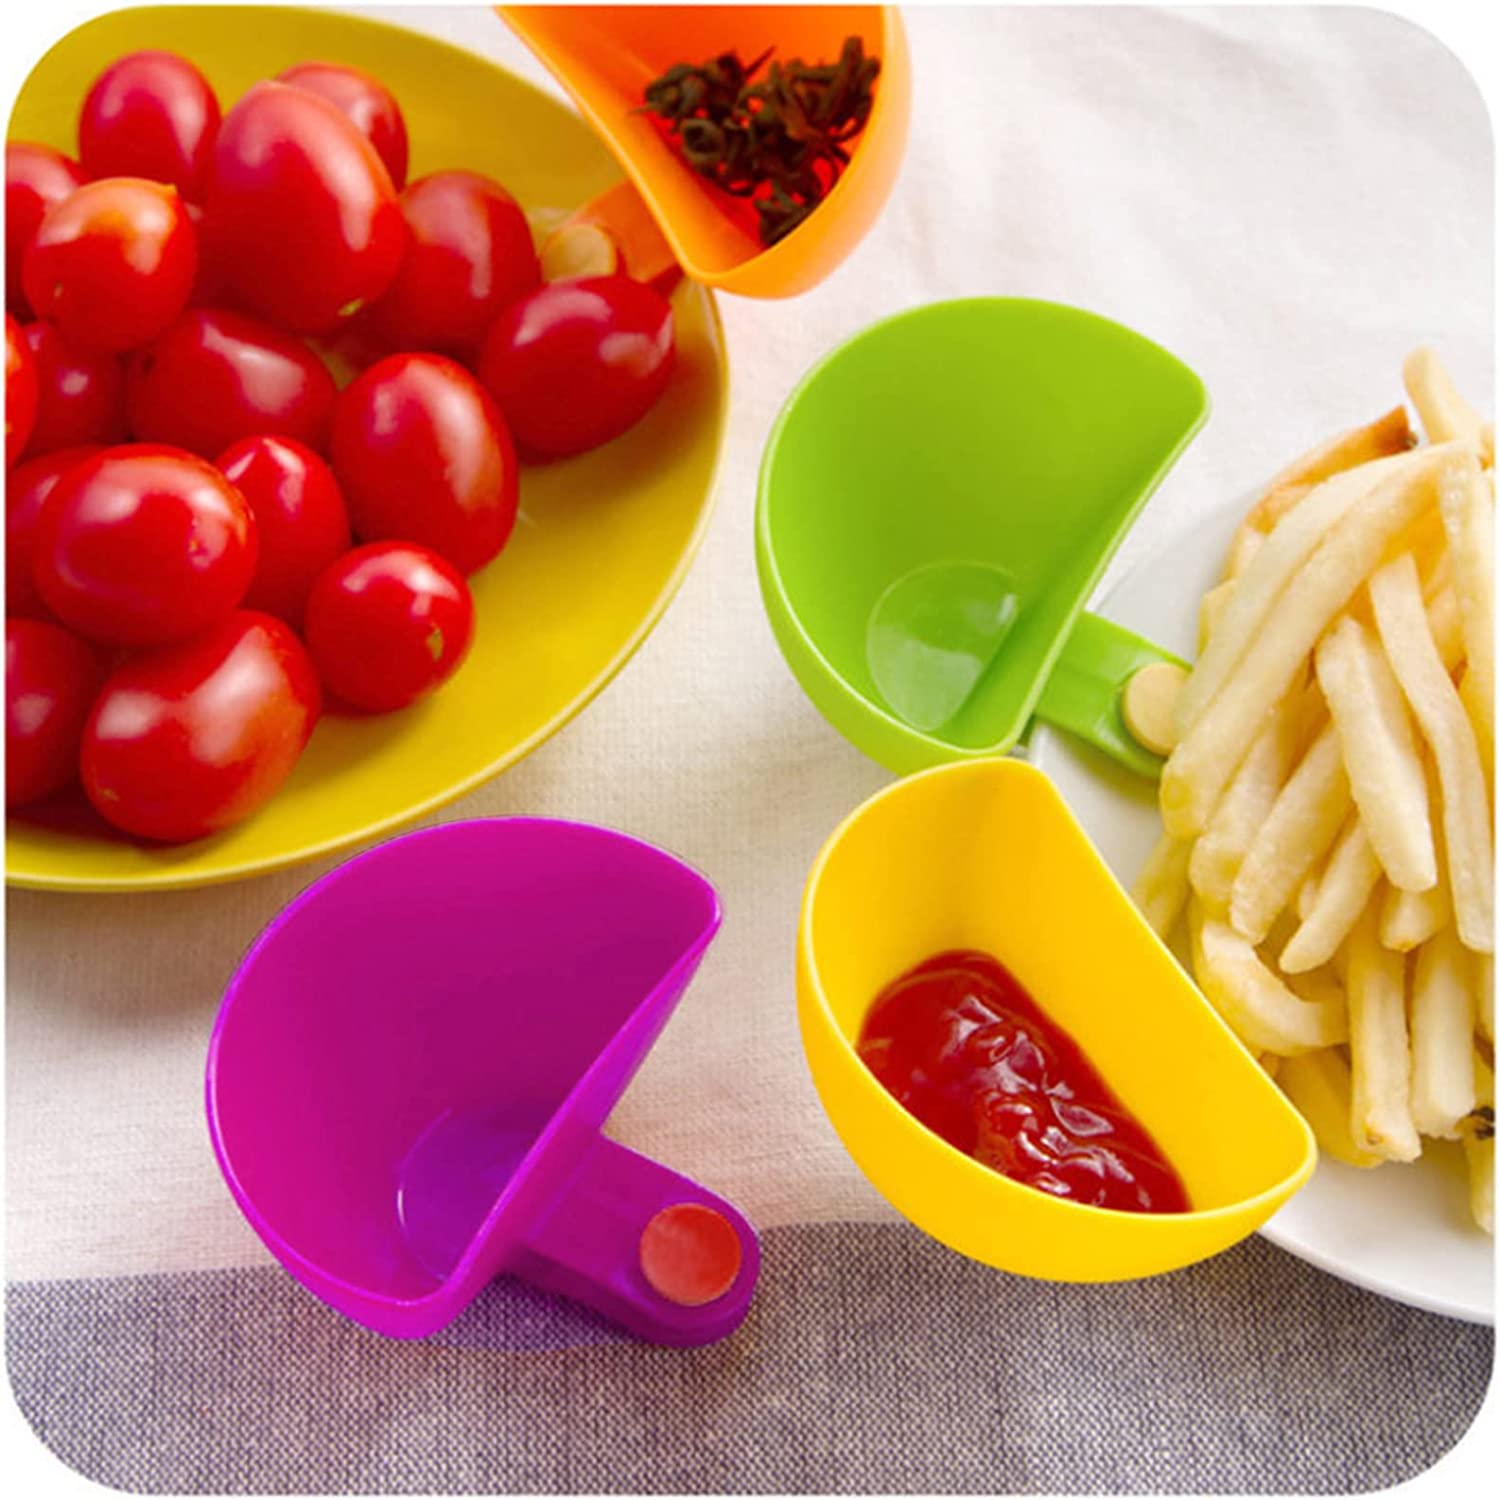 (🌲Early Christmas Sale- SAVE 48% OFF) 4 Pcs Set Dip Clip Bowl Plate Holder (BUY 2 GET 1 FREE NOW)